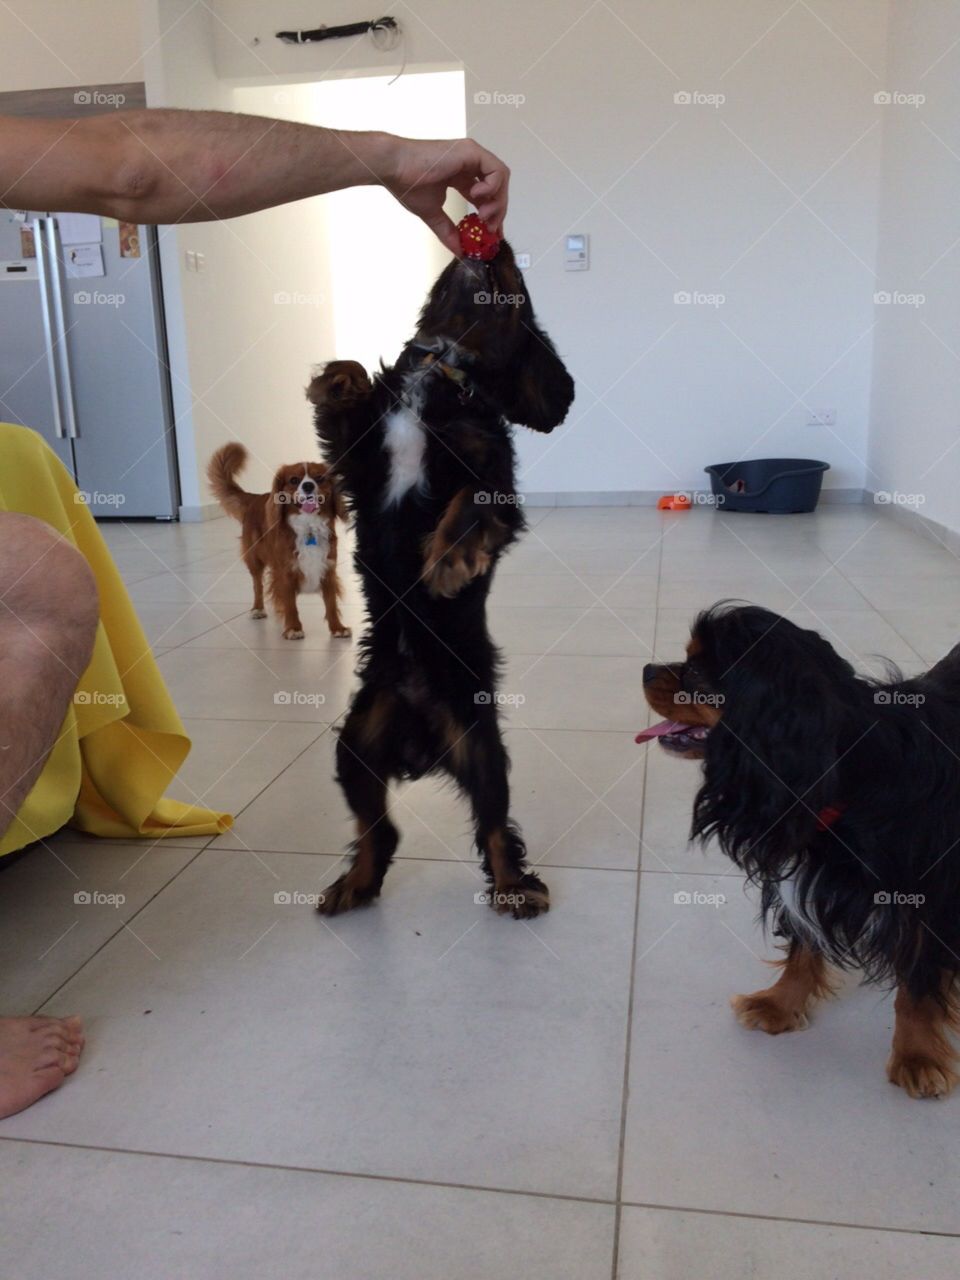 Play time. Cavalier King Charles Spaniels